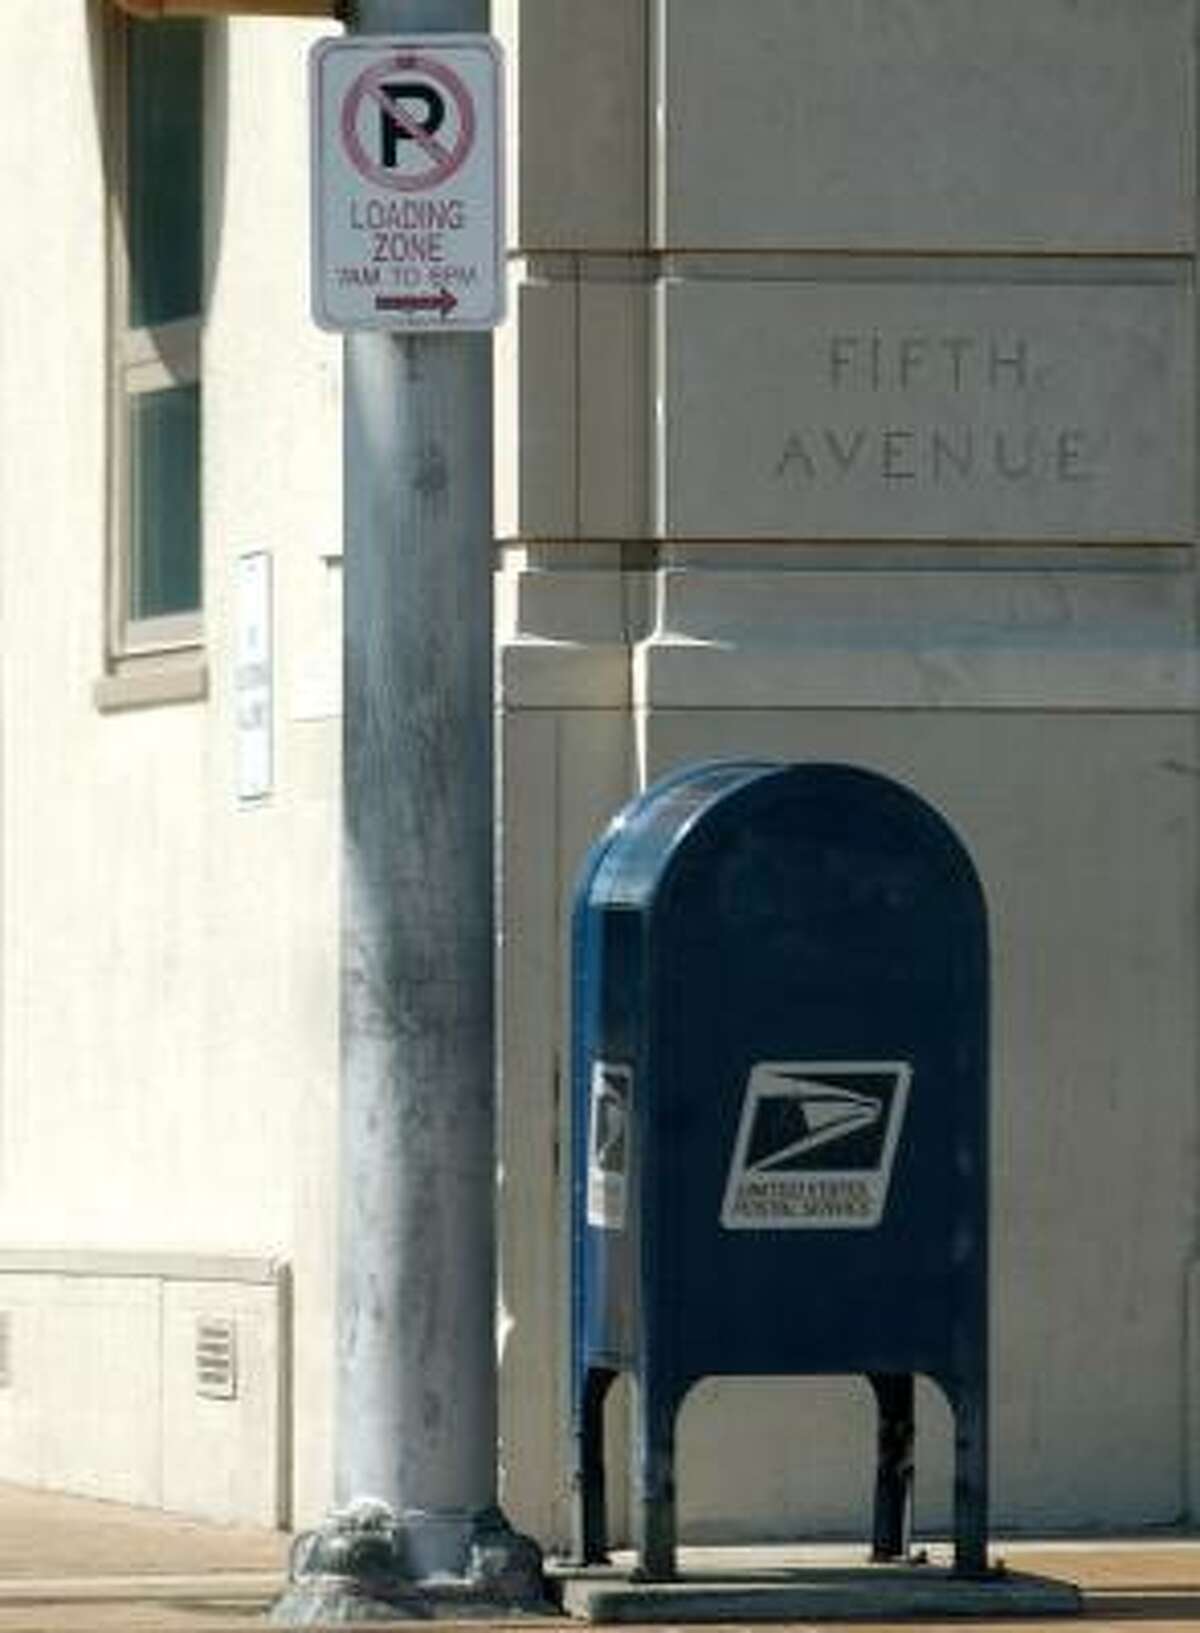 The Postal Service has tried to cut costs by pulling the familiar blue mailboxes from street corners nationwide.